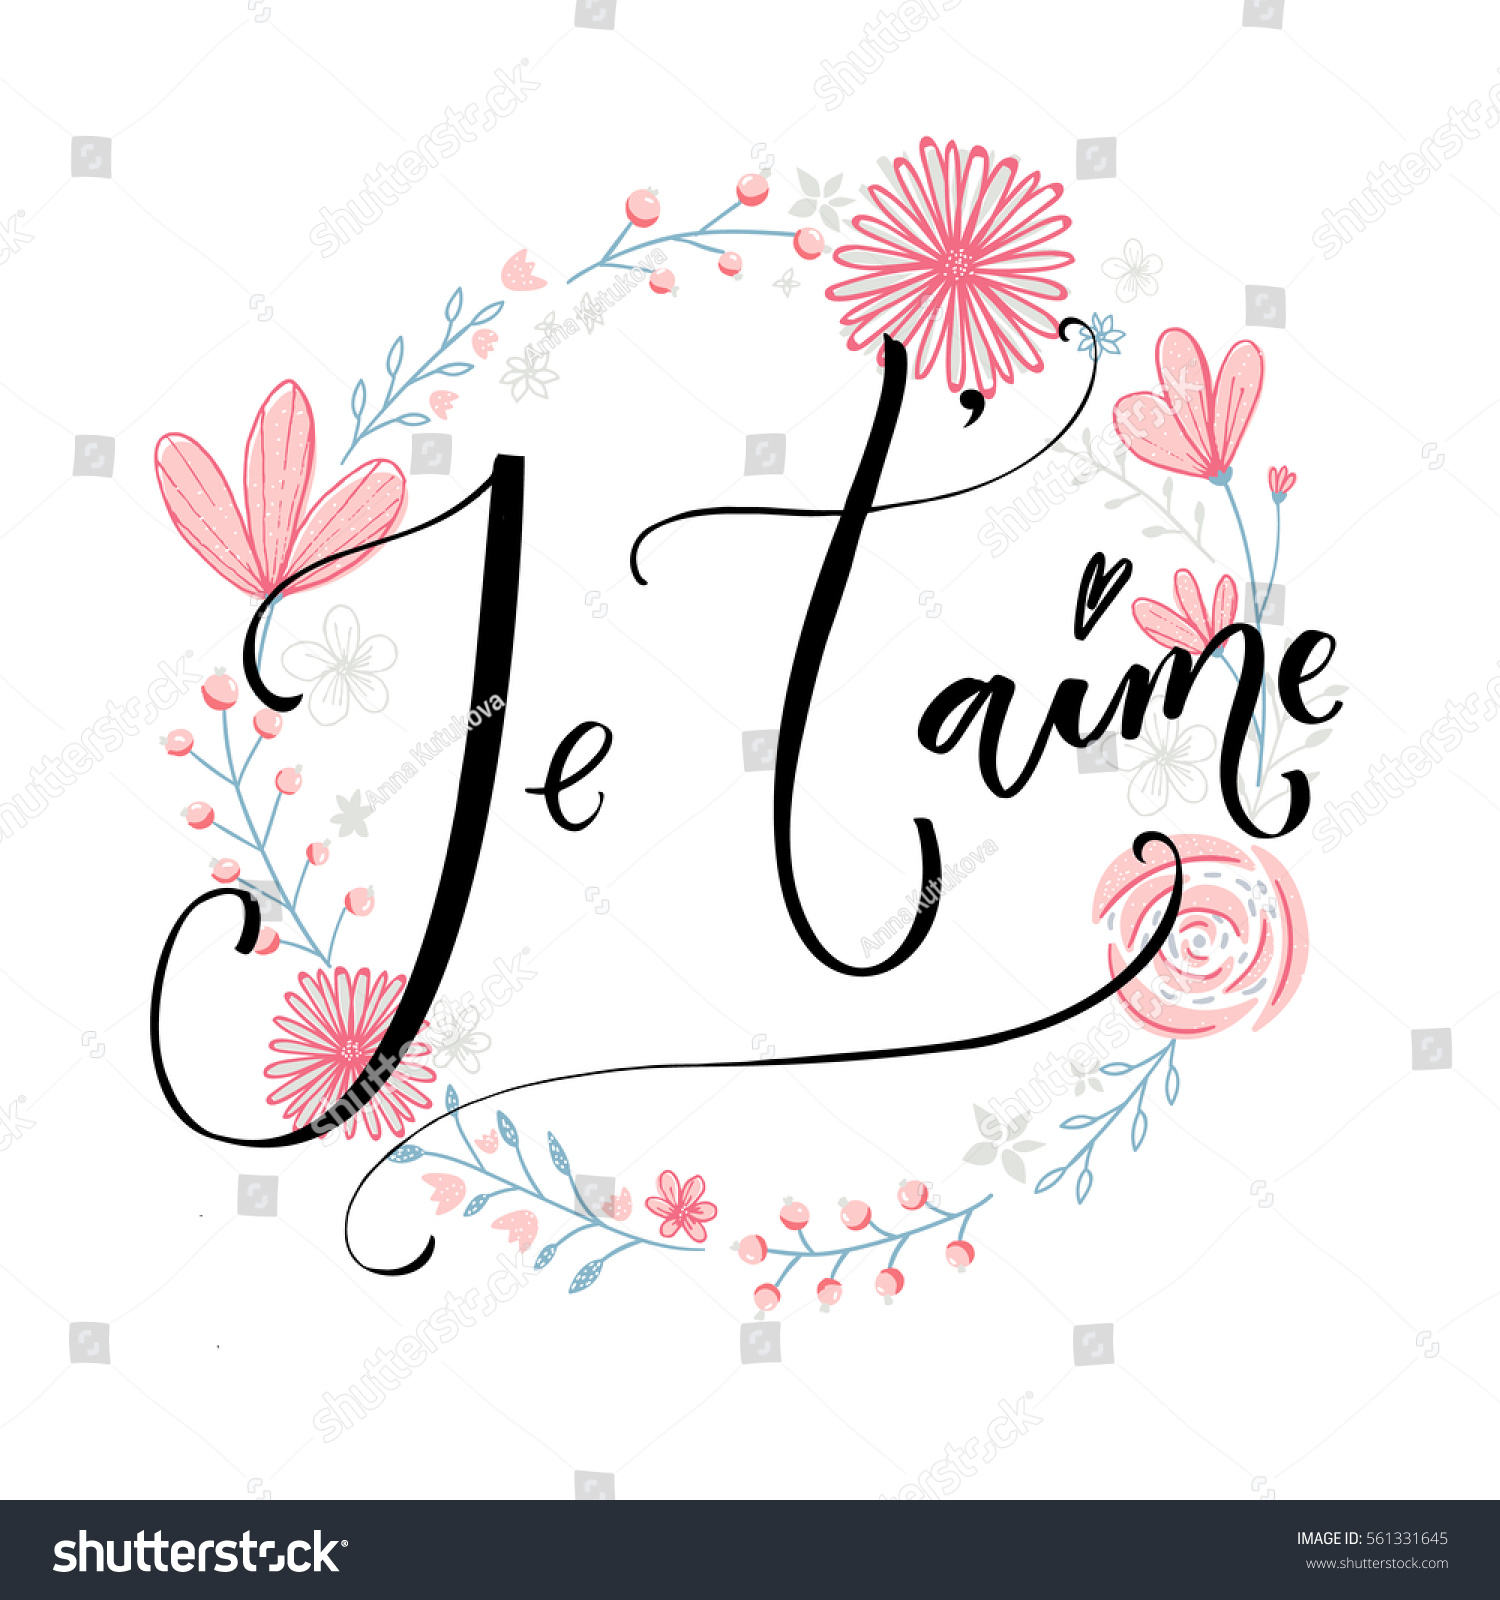 French saying means I love you Romantic quote modern calligraphy